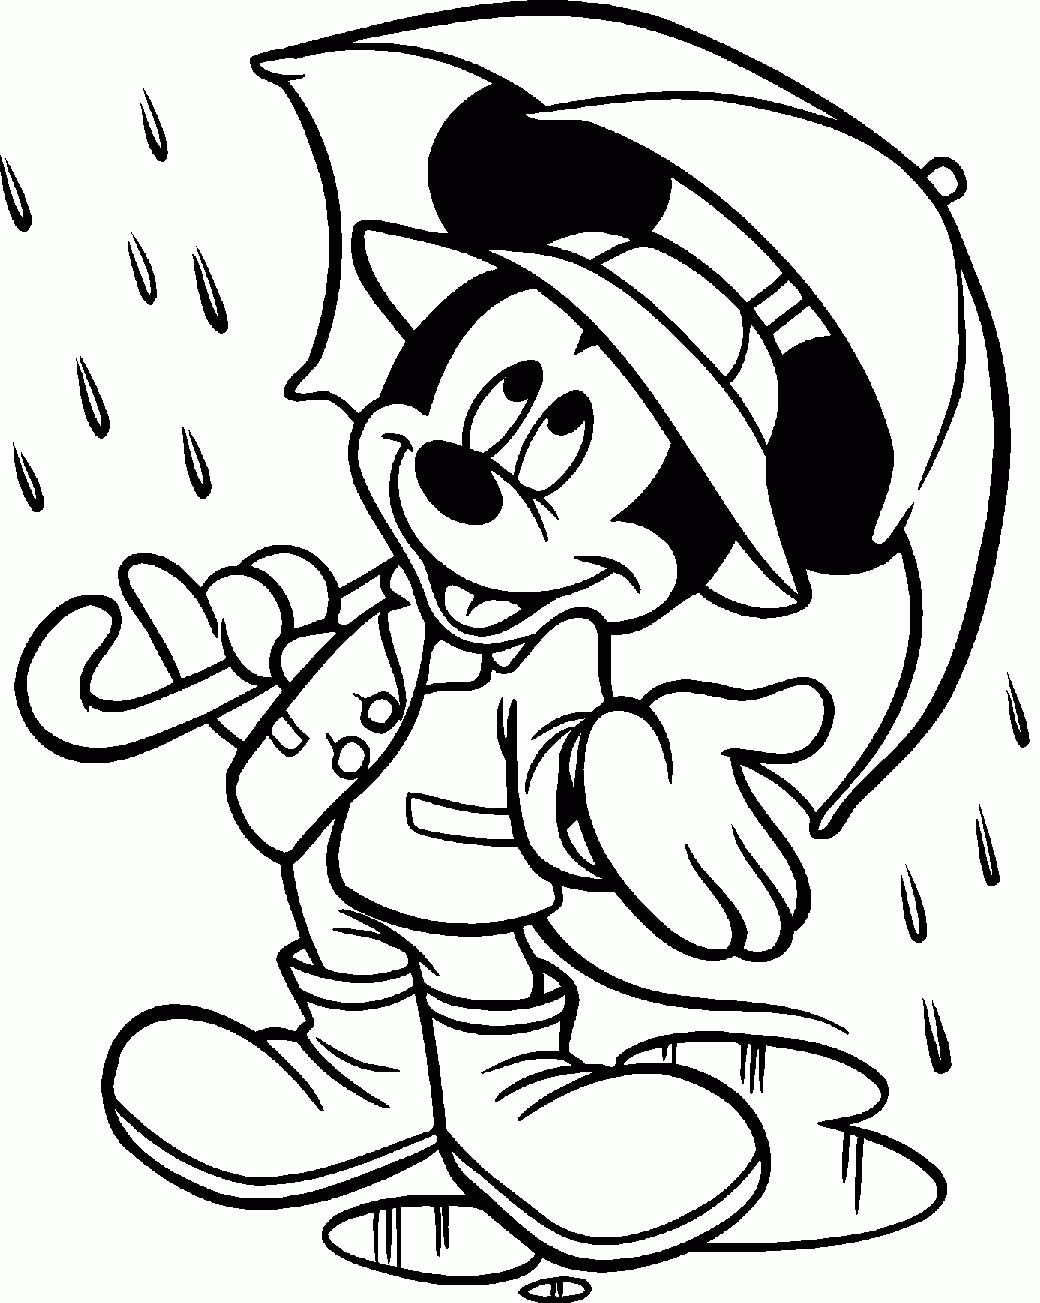 Free Mickey Mouse Coloring Pages Image 25 For Kids - VoteForVerde.com